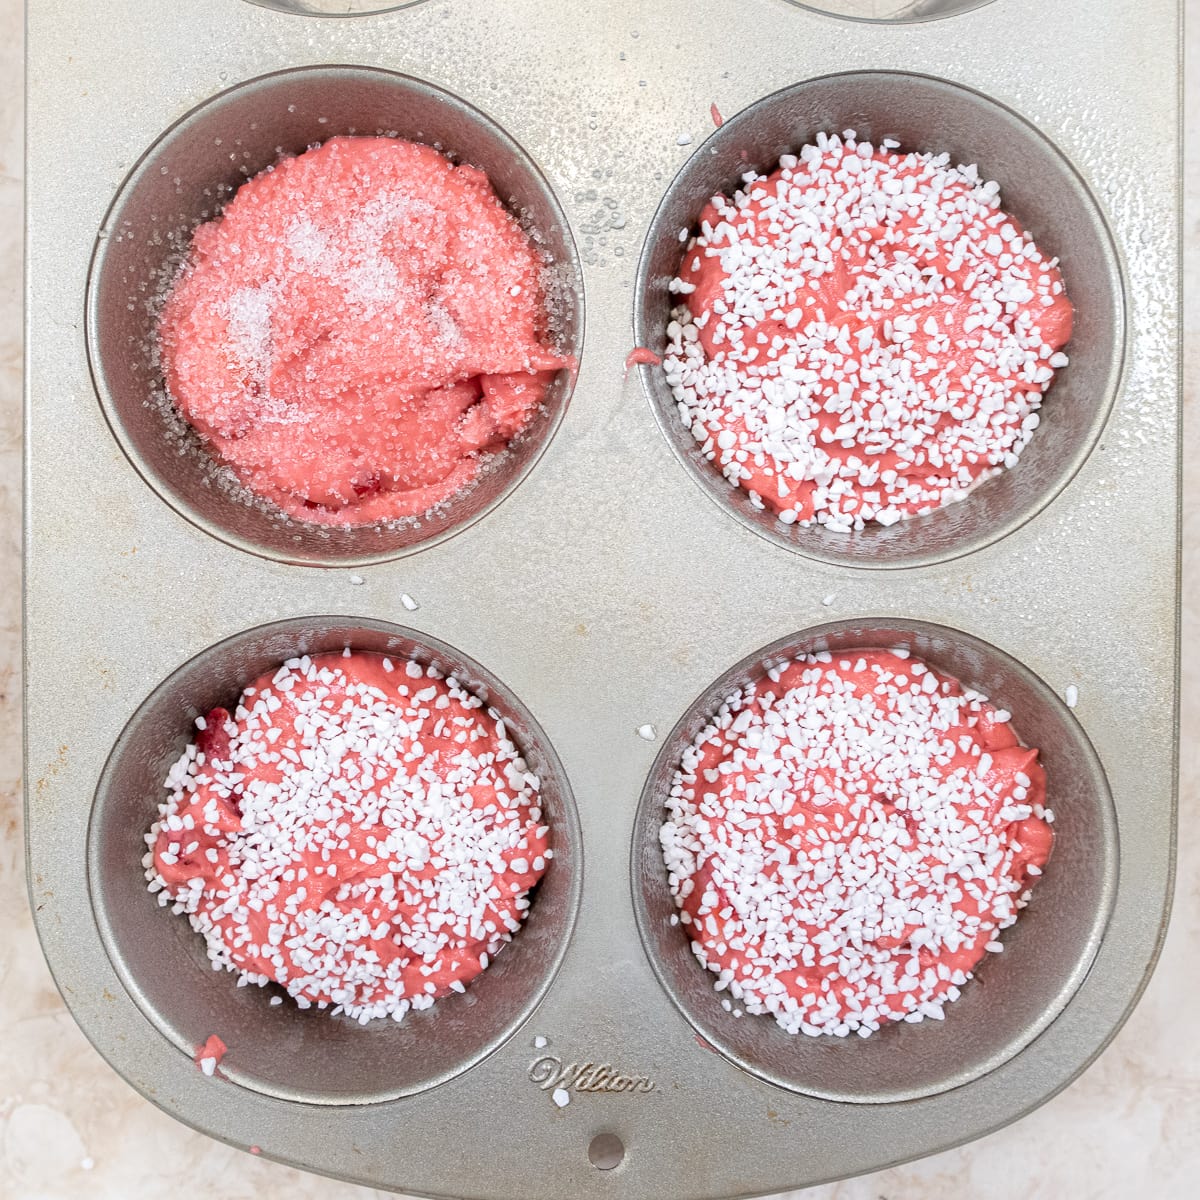 Sugars topping the Strawberry Muffins